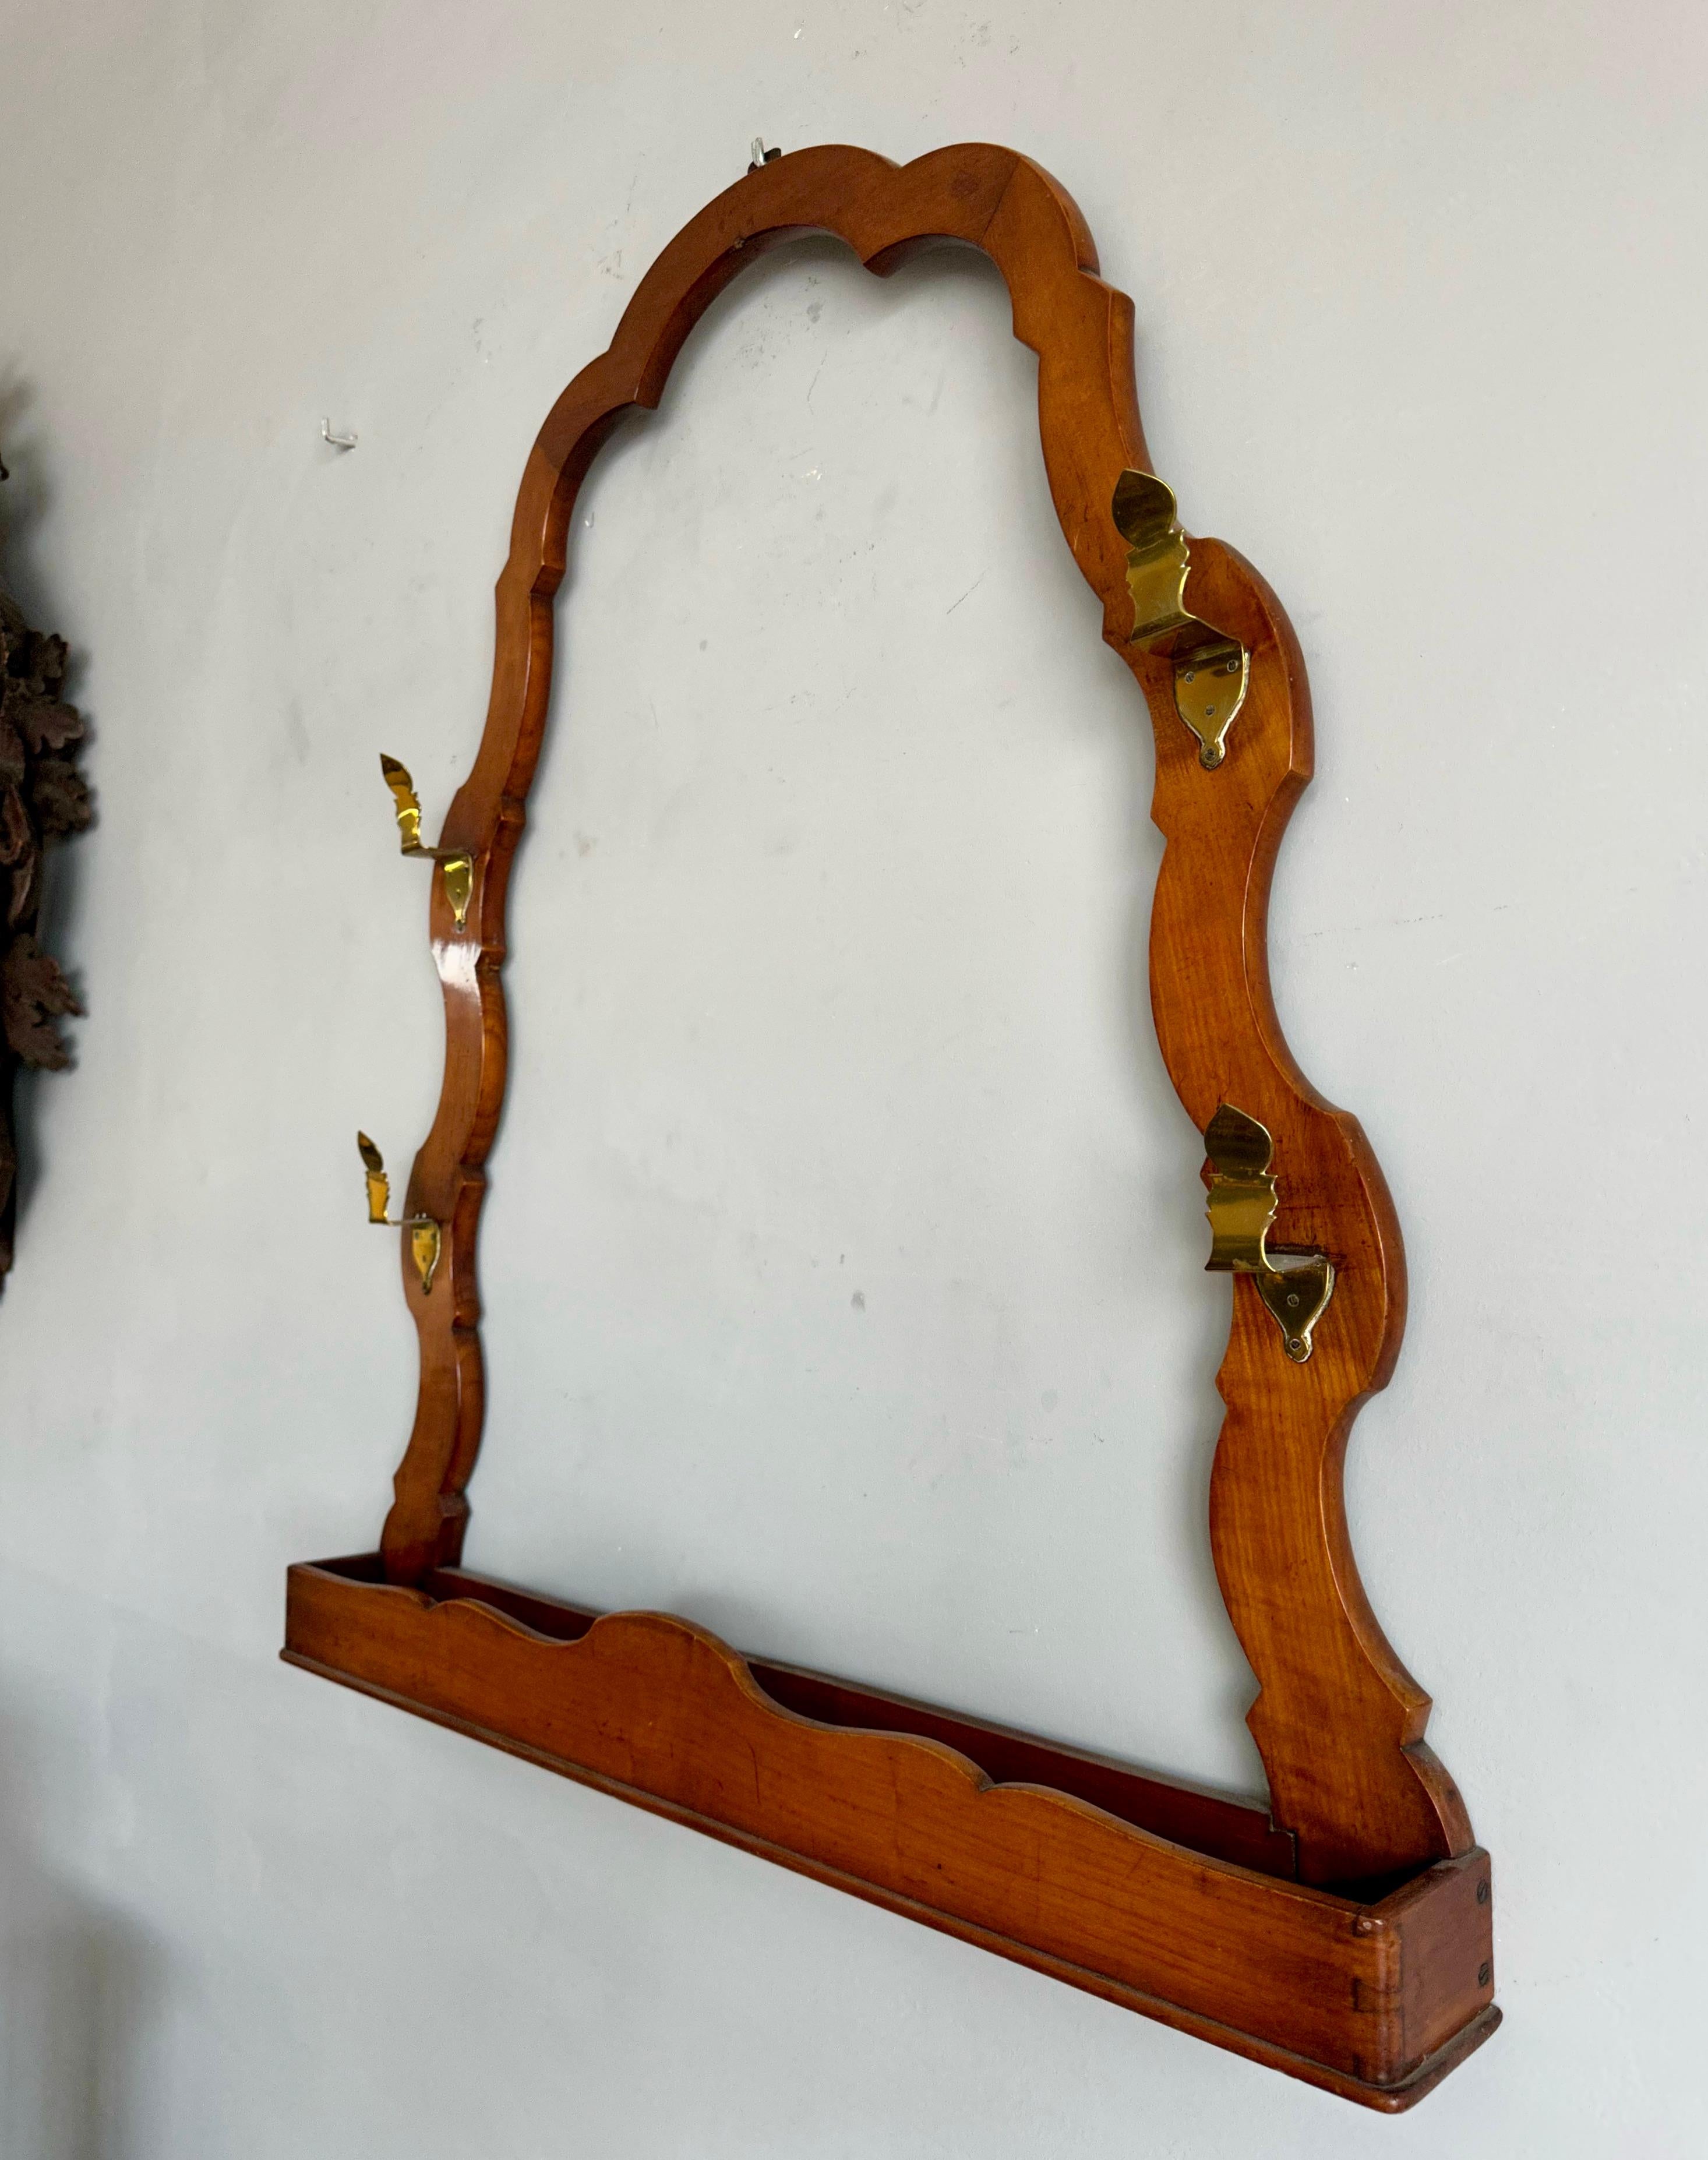 Unique and large Victorian rifle rack with width open box at the bottom.

This highly decorative and good condition gun rack for wall mounting could look great above your fireplace, but also in a private library, home office or trophy room etc.